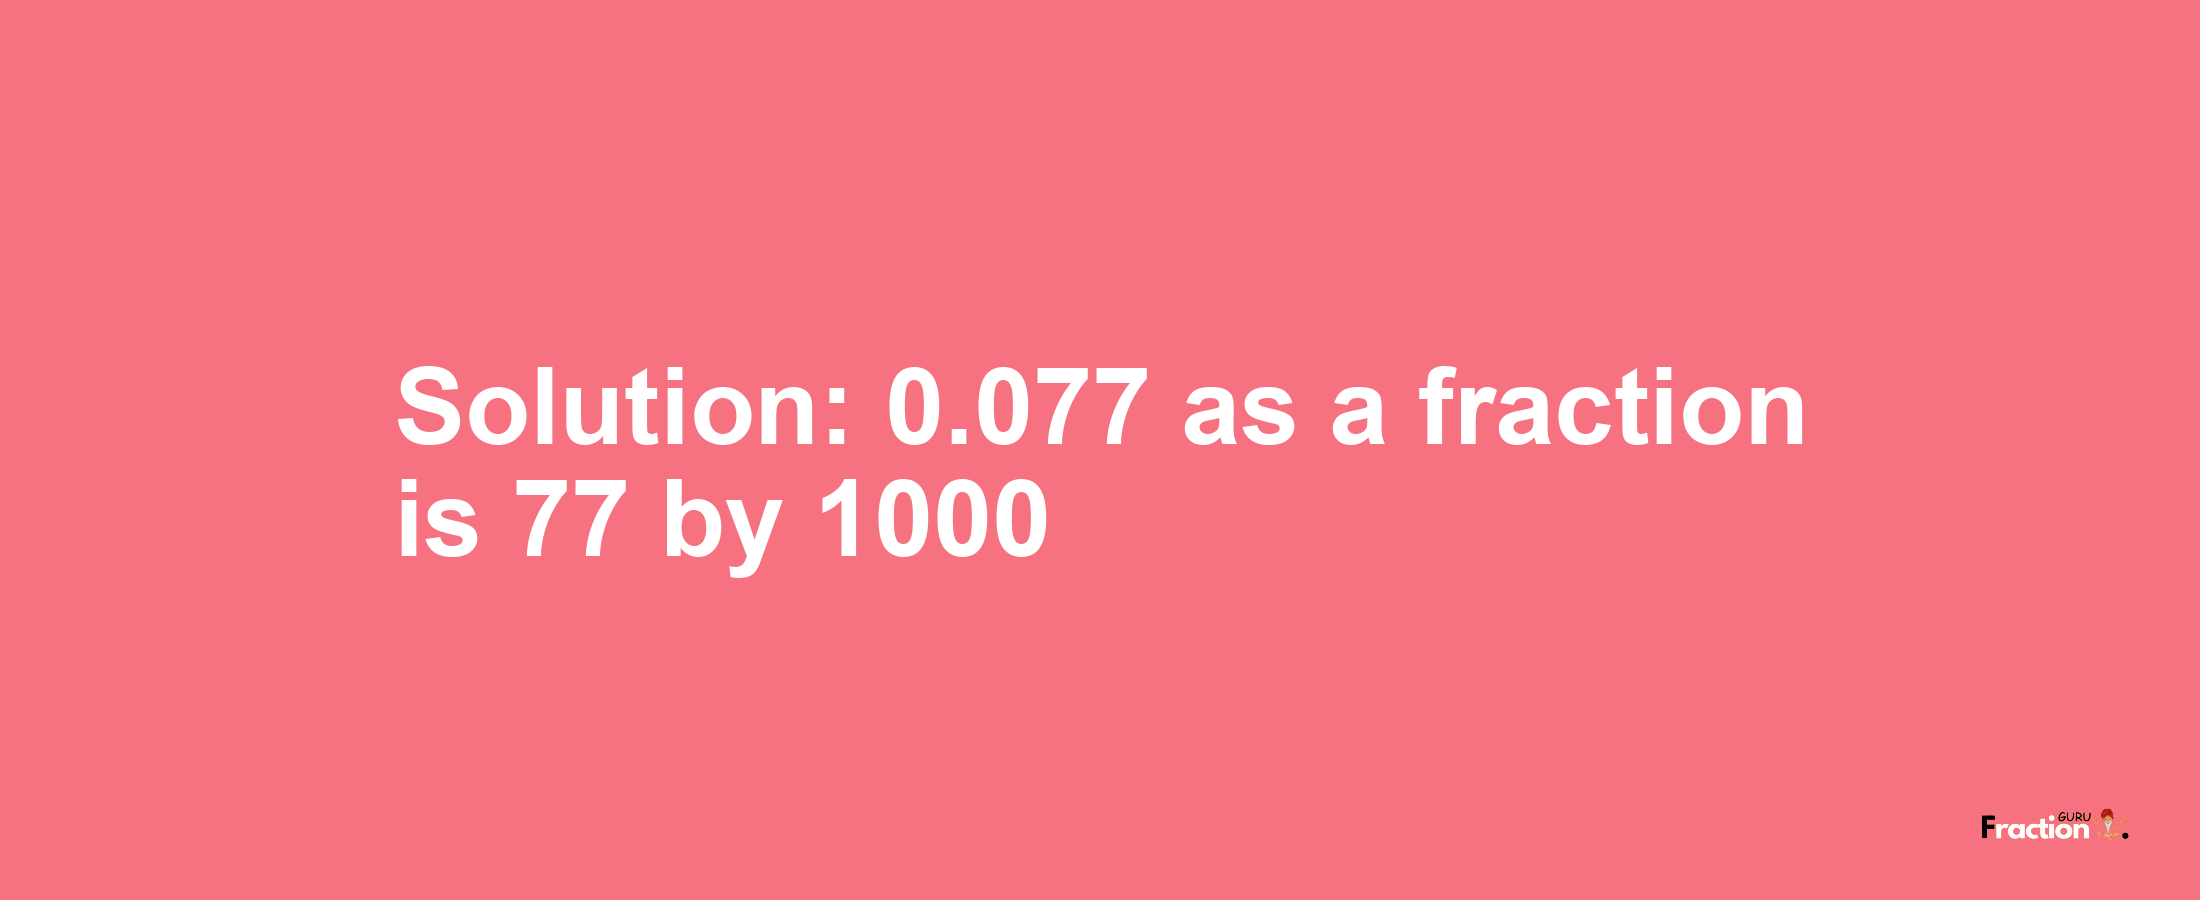 Solution:0.077 as a fraction is 77/1000